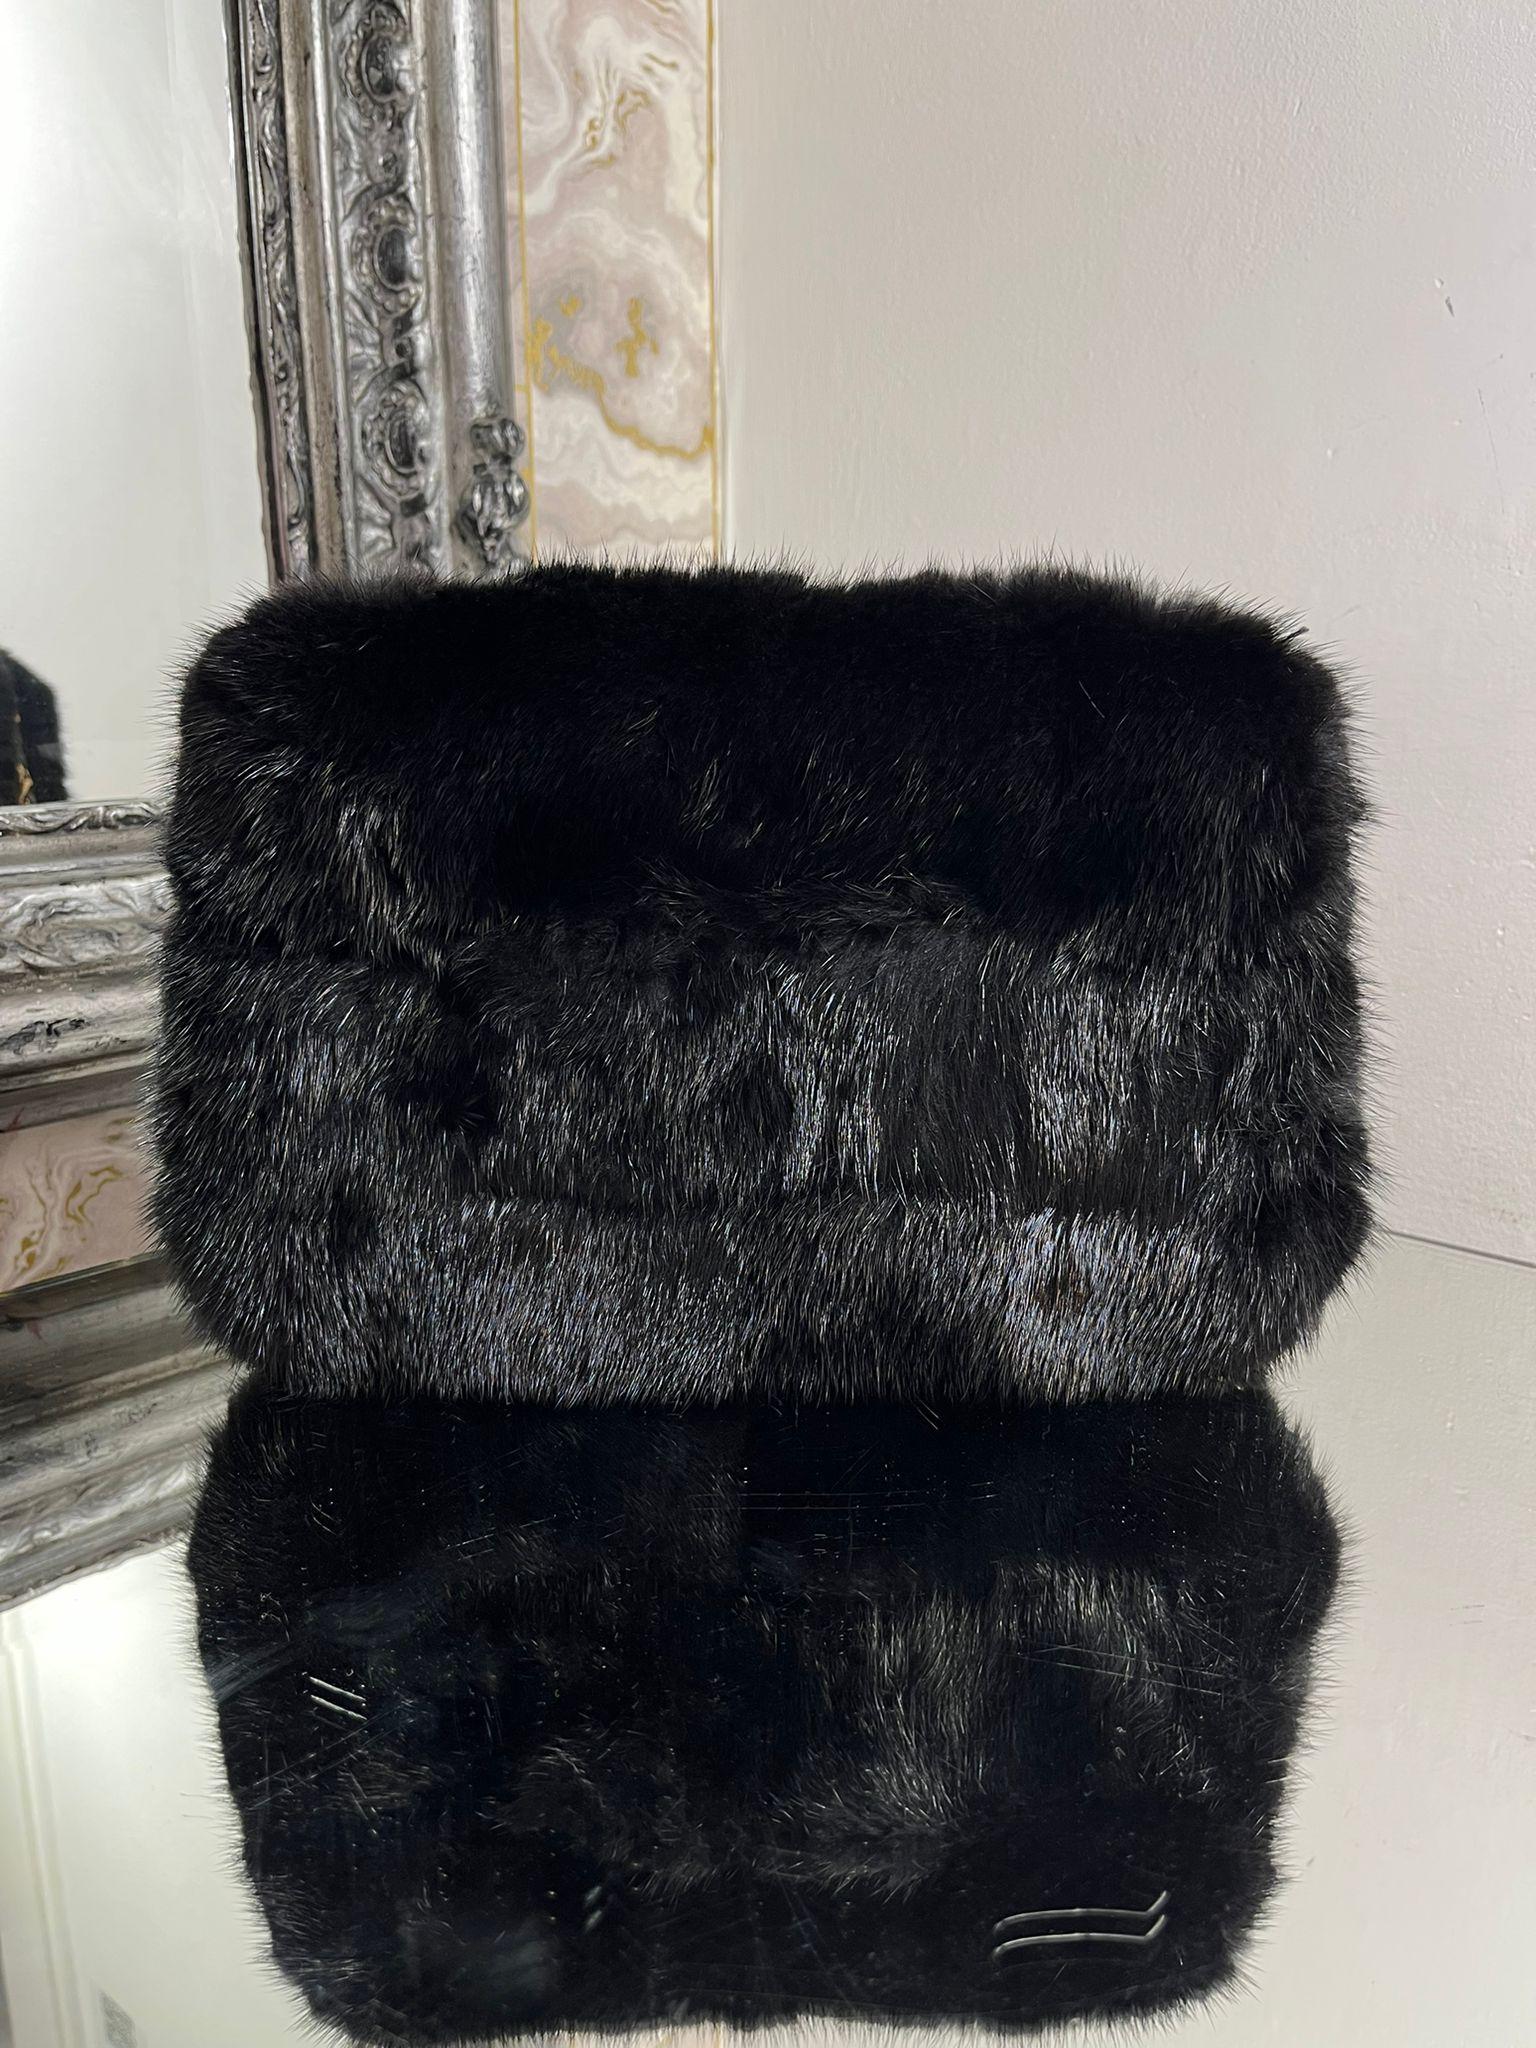 Tyler Ellis Mink Fur Clutch Bag With Leather & Chain Strap In Excellent Condition For Sale In London, GB